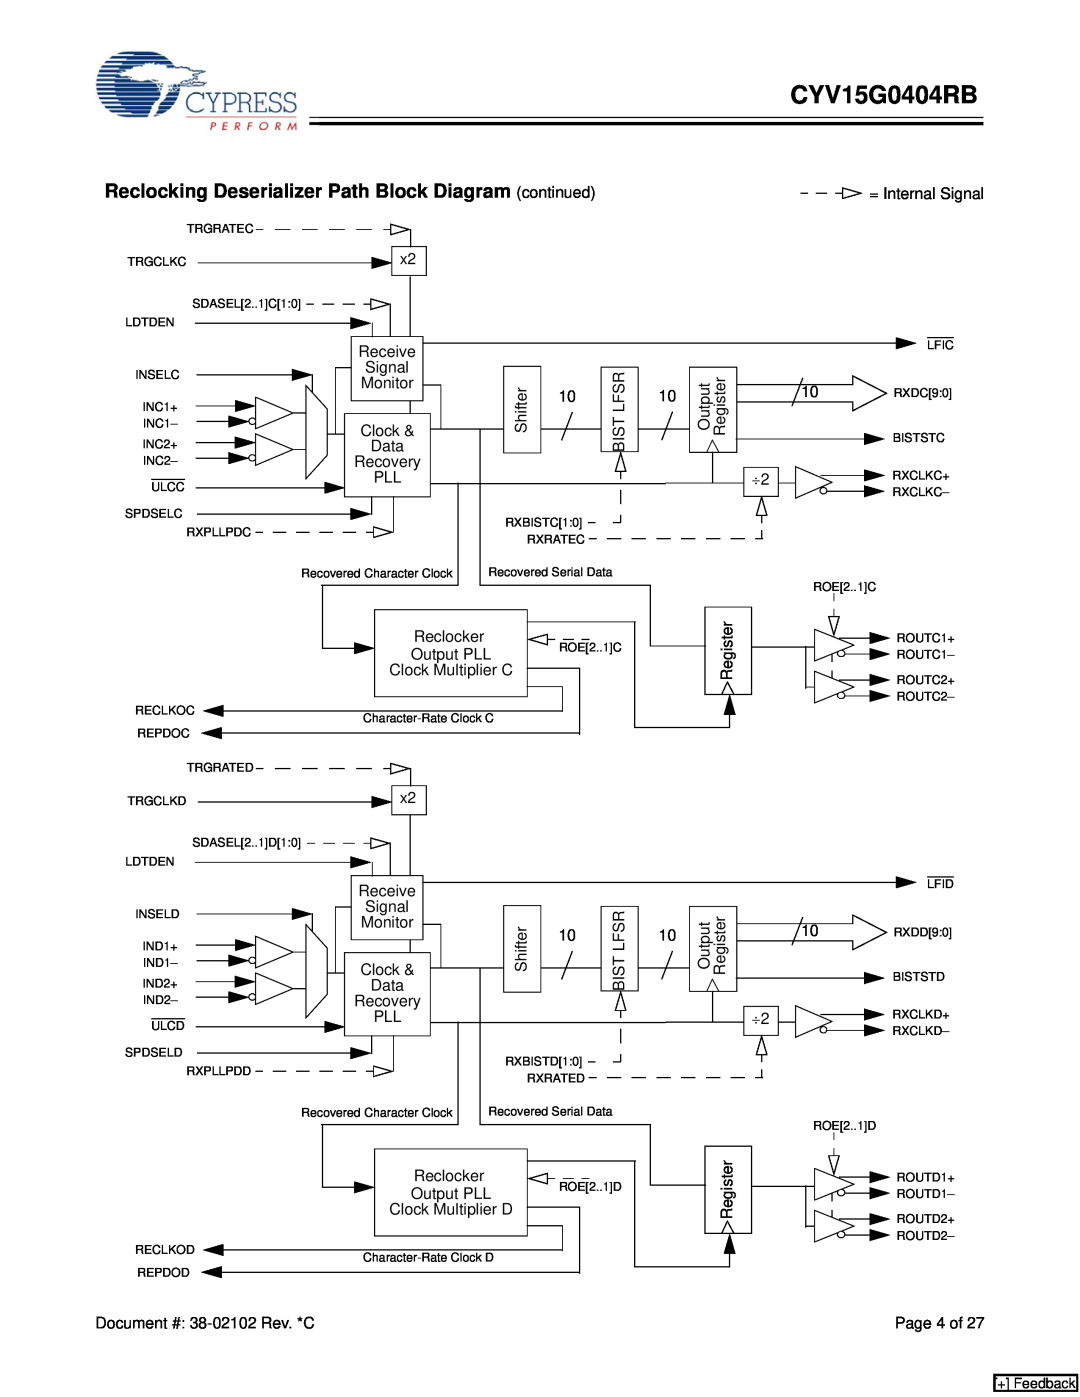 Cypress CYV15G0404RB manual Reclocking Deserializer Path Block Diagram continued 